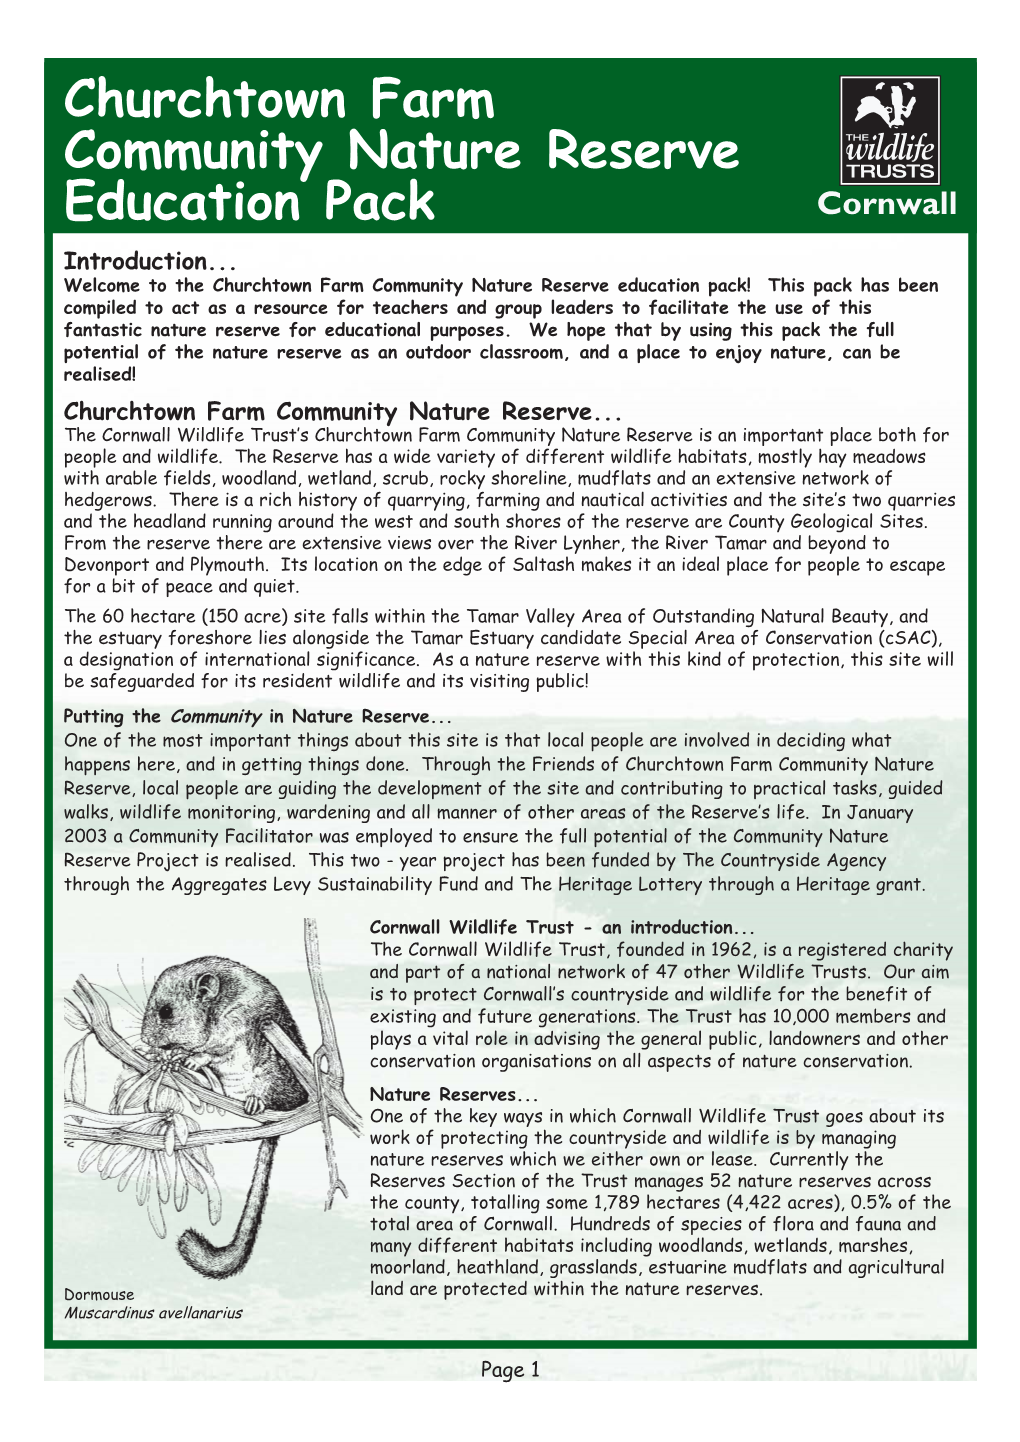 Churchtown Farm Community Nature Reserve Education Pack Introduction